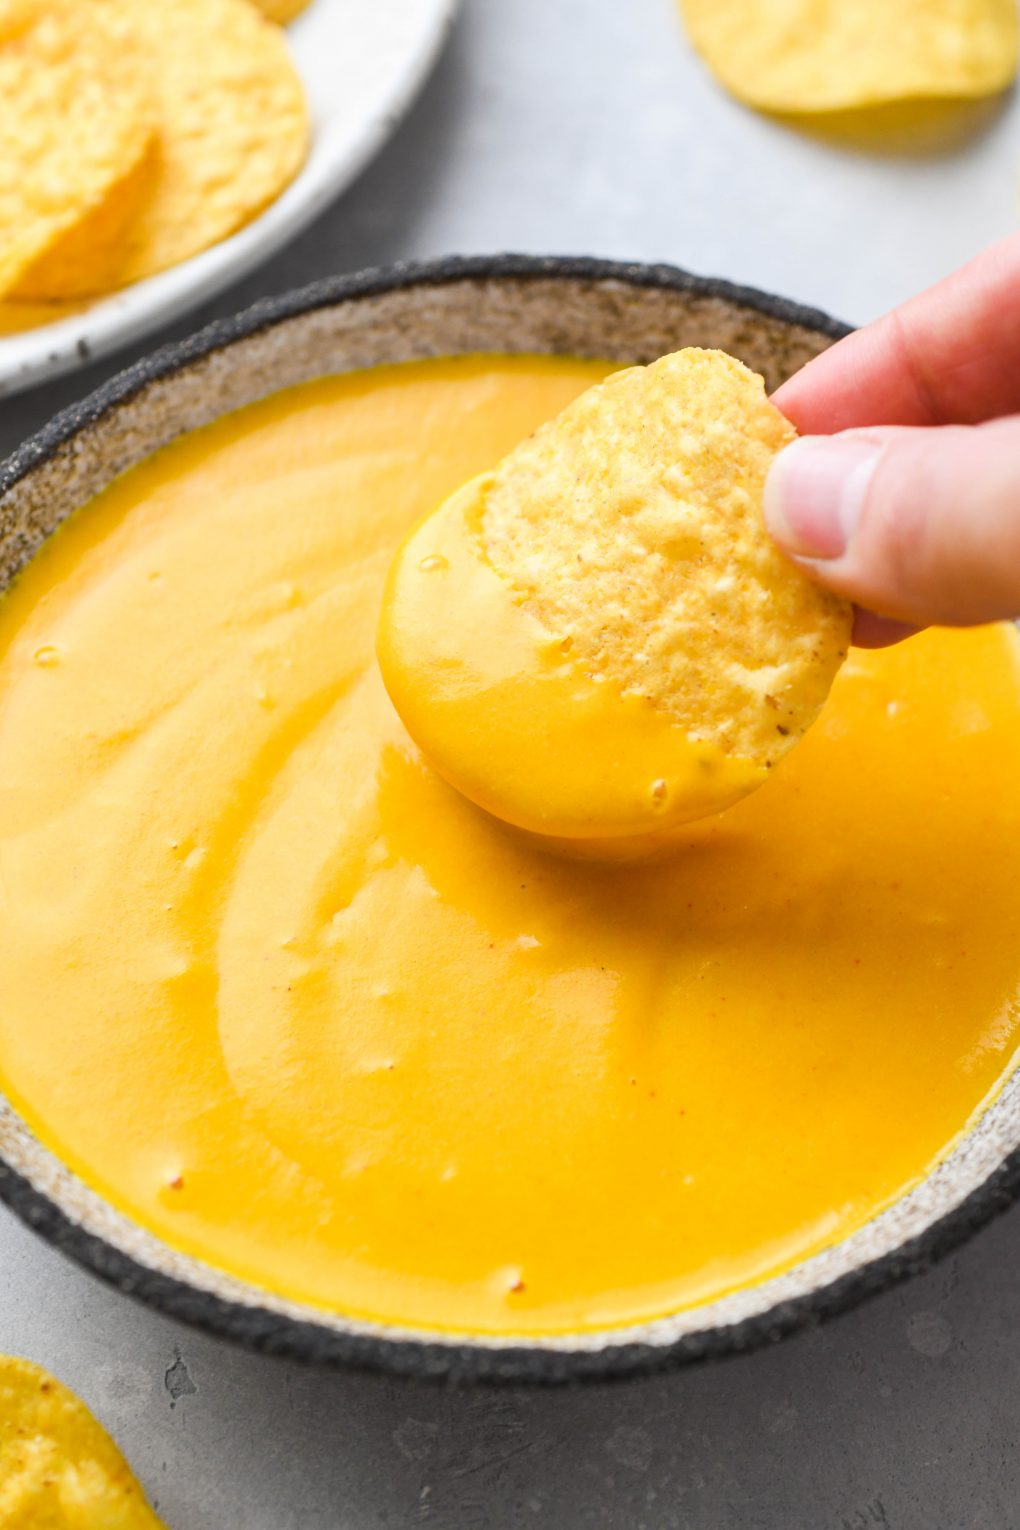 Image of a hand dipping a tortilla chip into a bowl of creamy vegan cheese sauce.